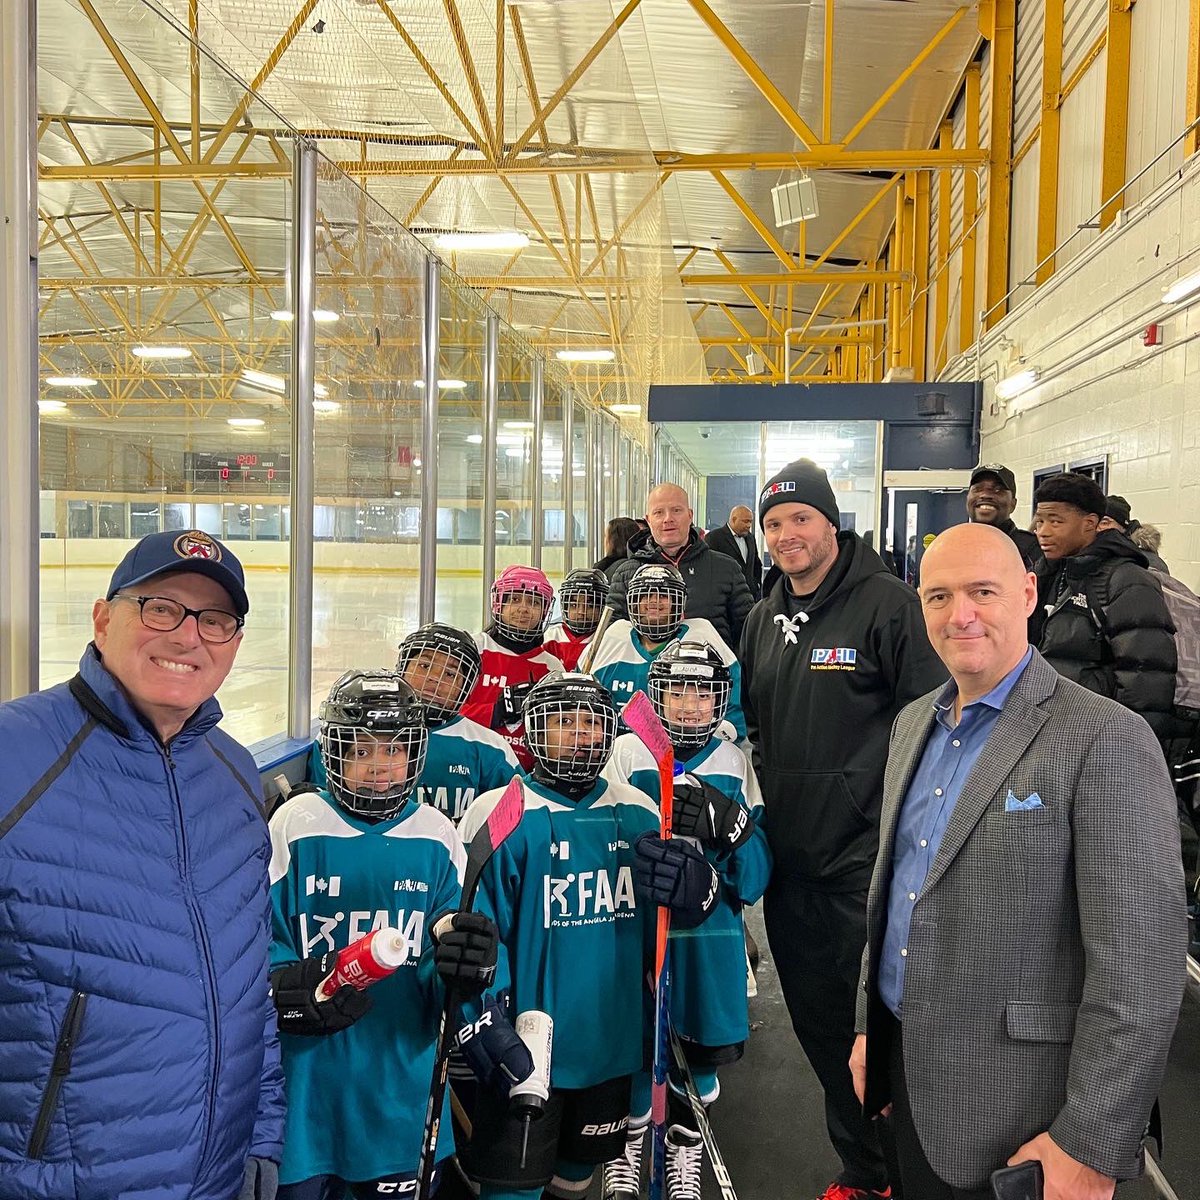 PAHL’s goal is to bring organized free ice hockey to kids in Flemingdon & Thorncliffe. All participants are outfitted with equipment, while @torontopolice Officers & community volunteers conduct a 10 week hockey skills & drills program, which leads into a 15 week season.